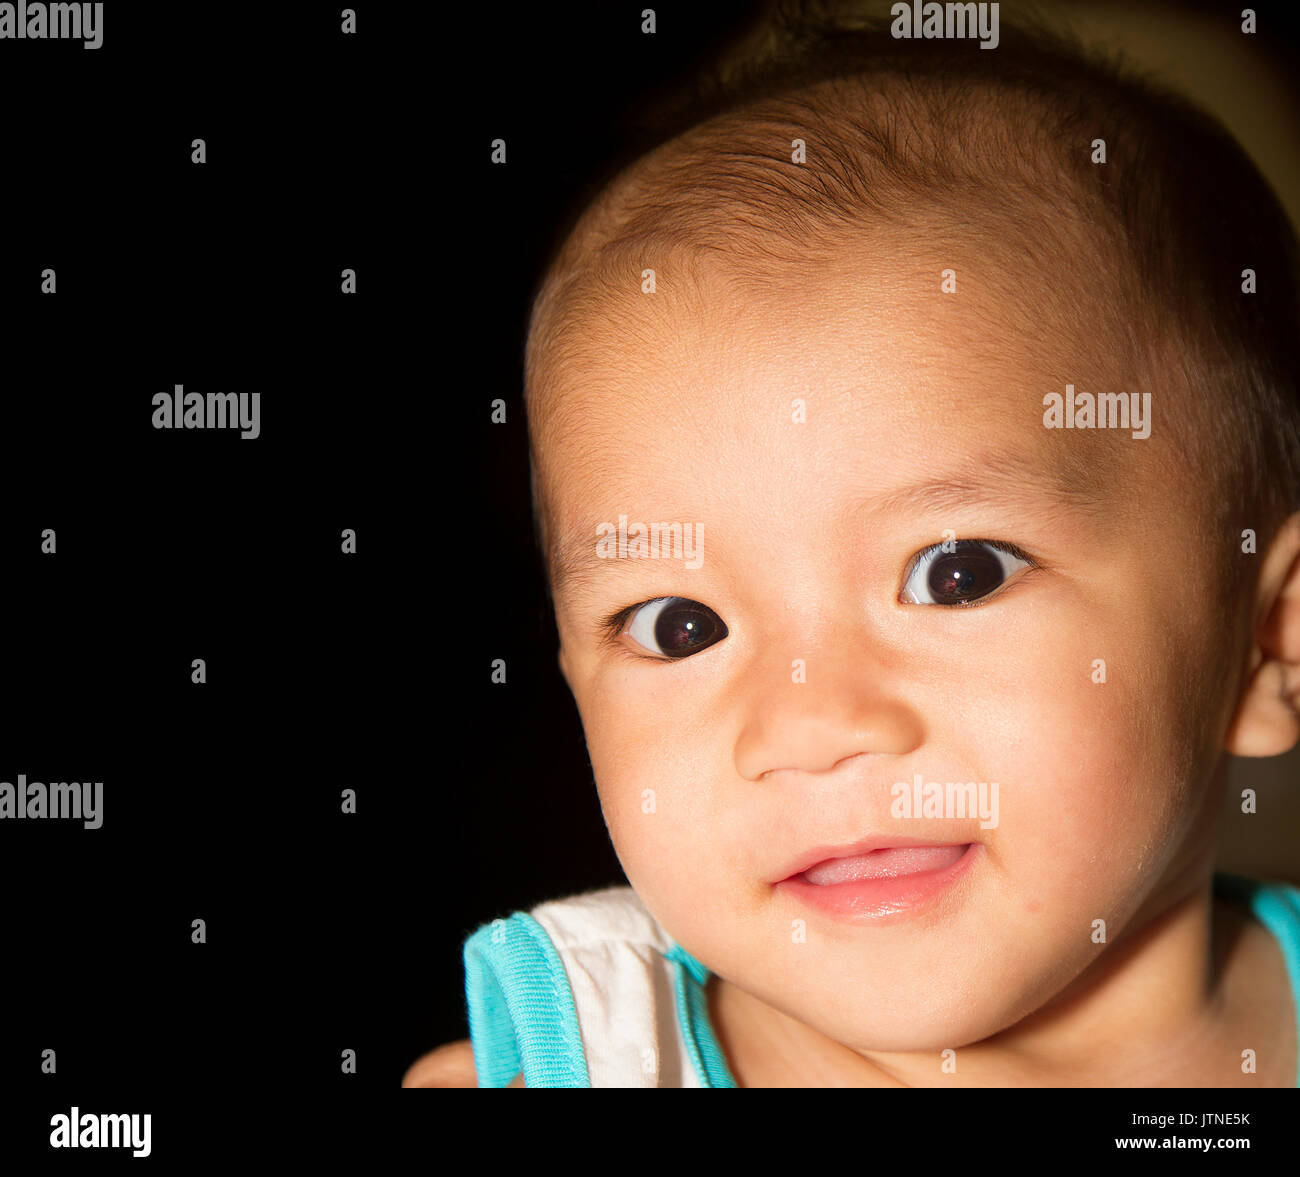 A baby boy portaiture with black color copy space. Stock Photo